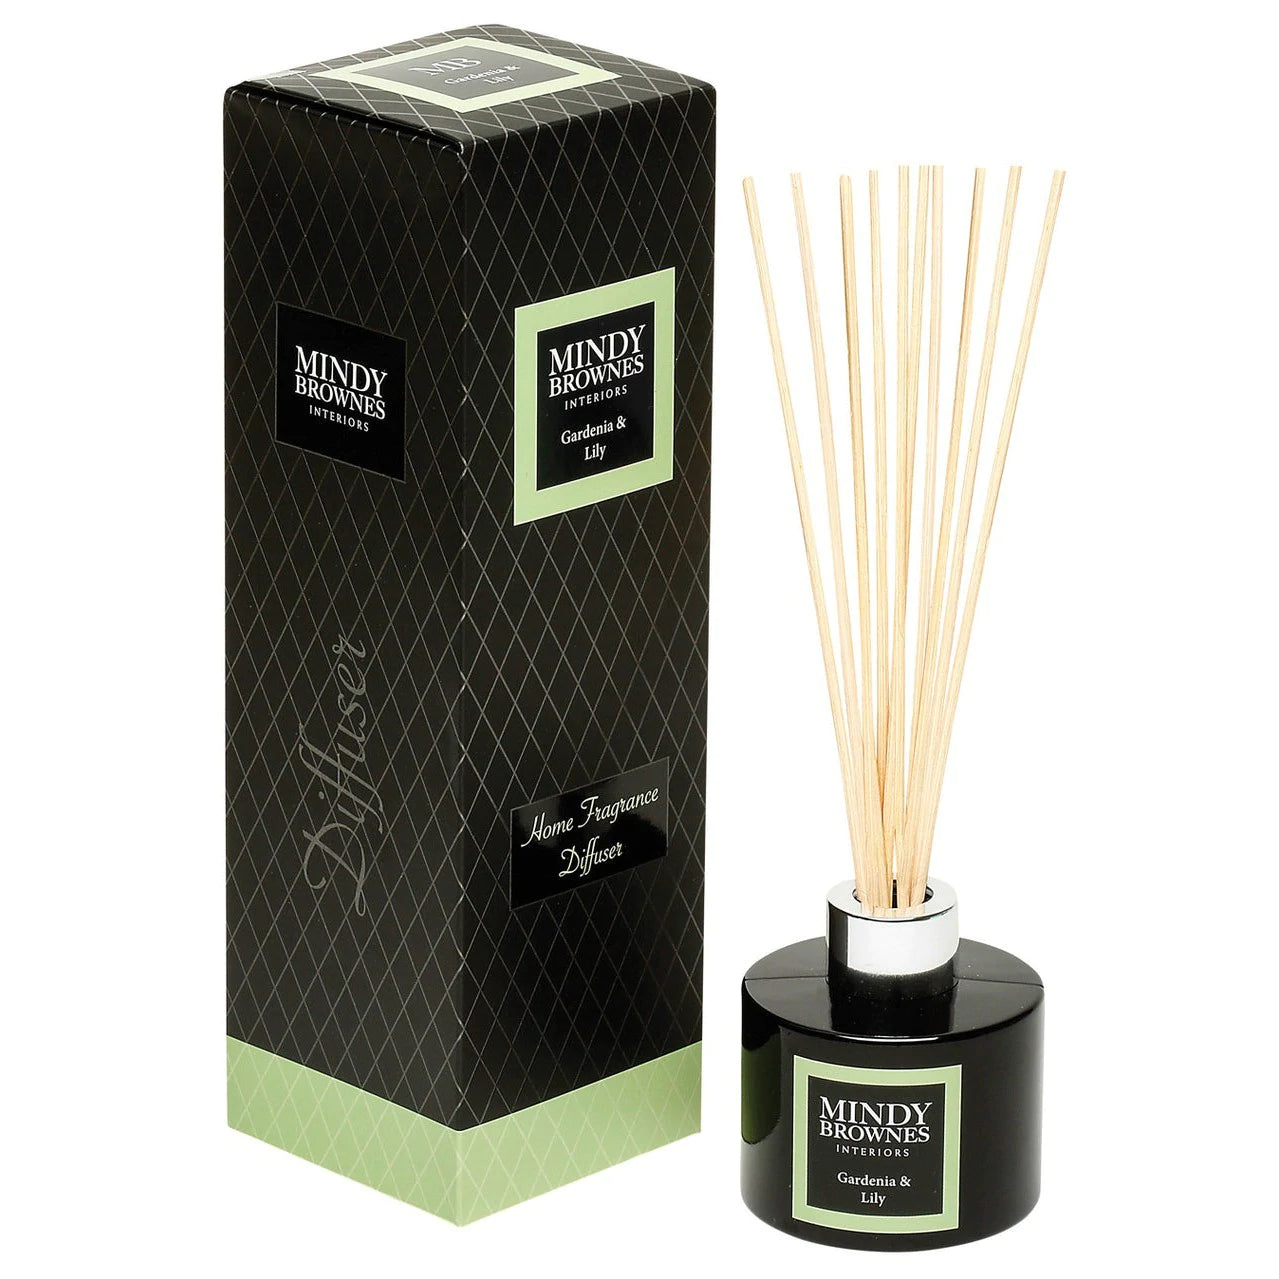 Mindy Brownes Luxury Diffuser 100ml - Gardenia & Lily